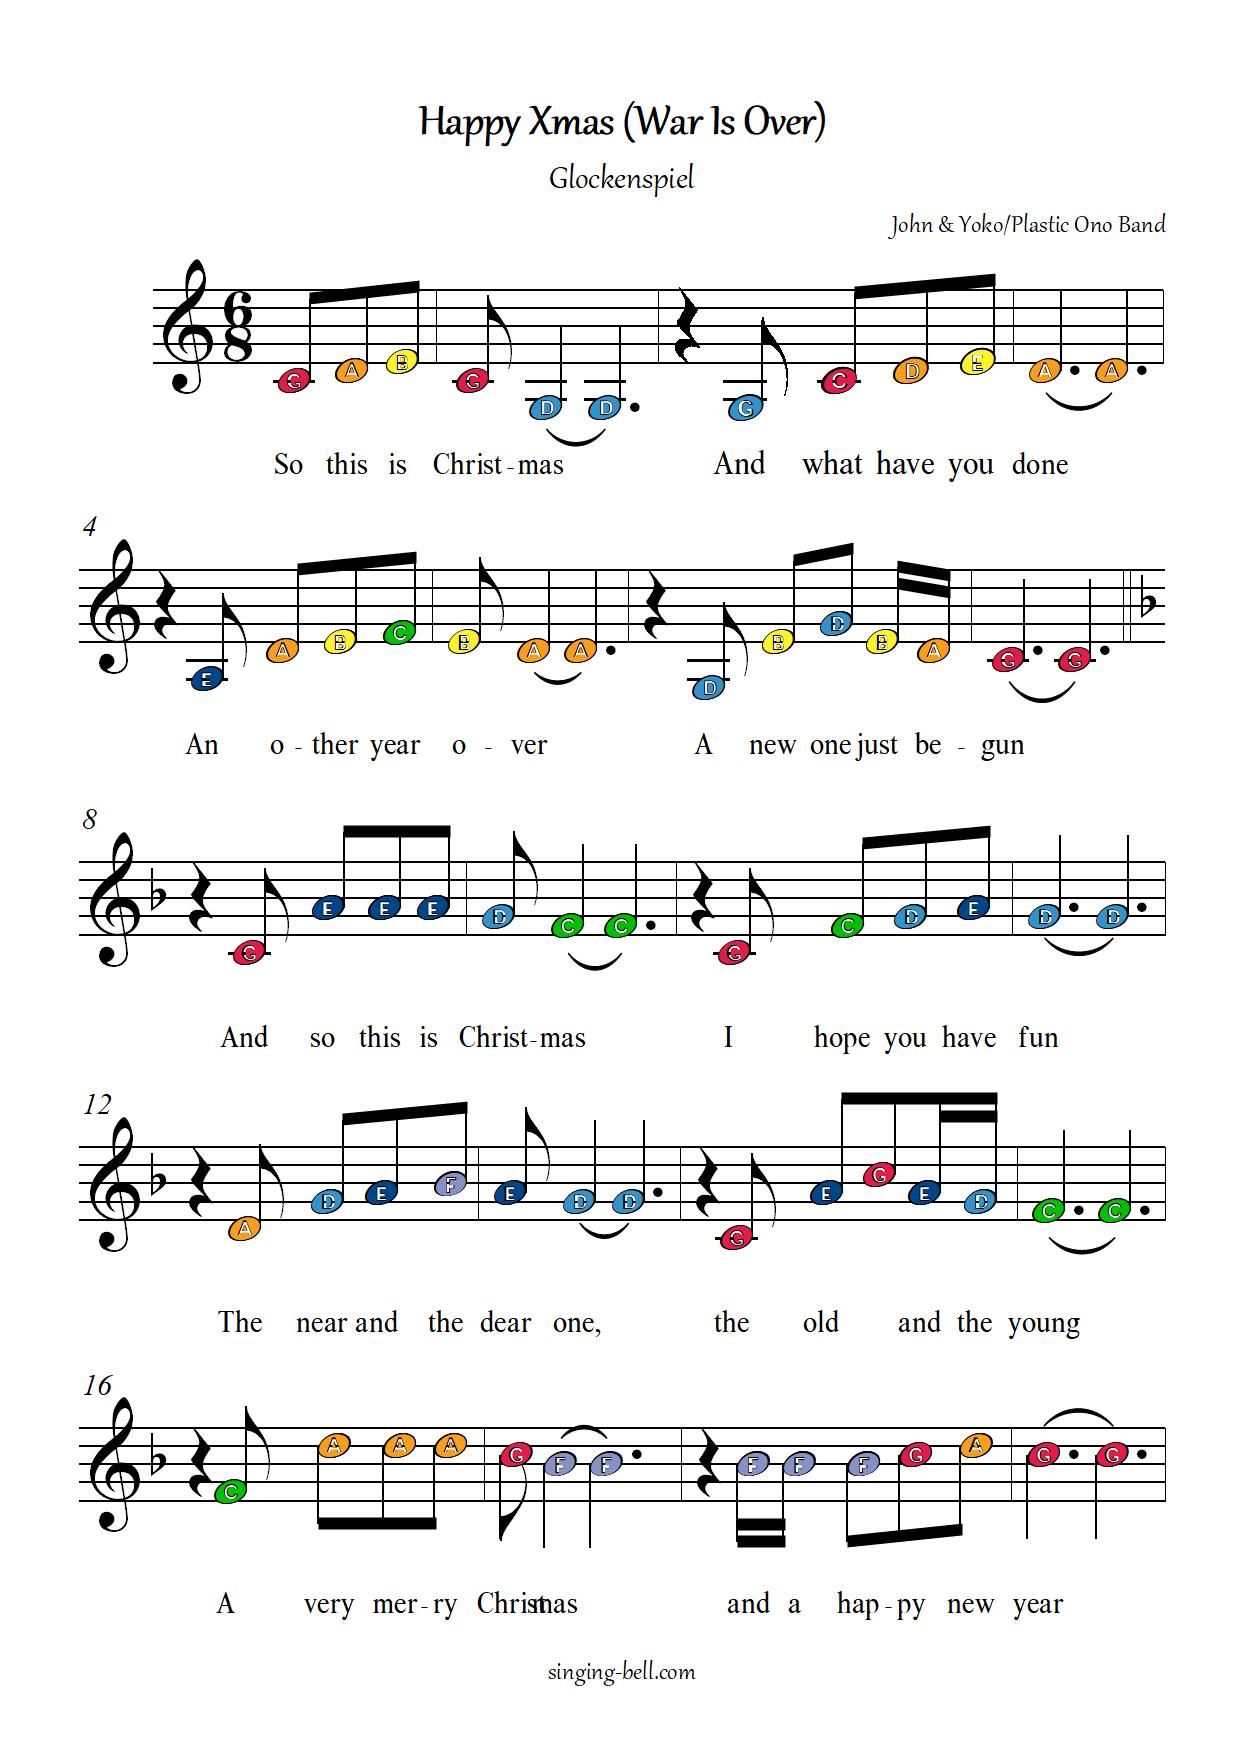 Happy Xmas War is over free xylophone glockenspiel sheet music color notes chart pdf p.1